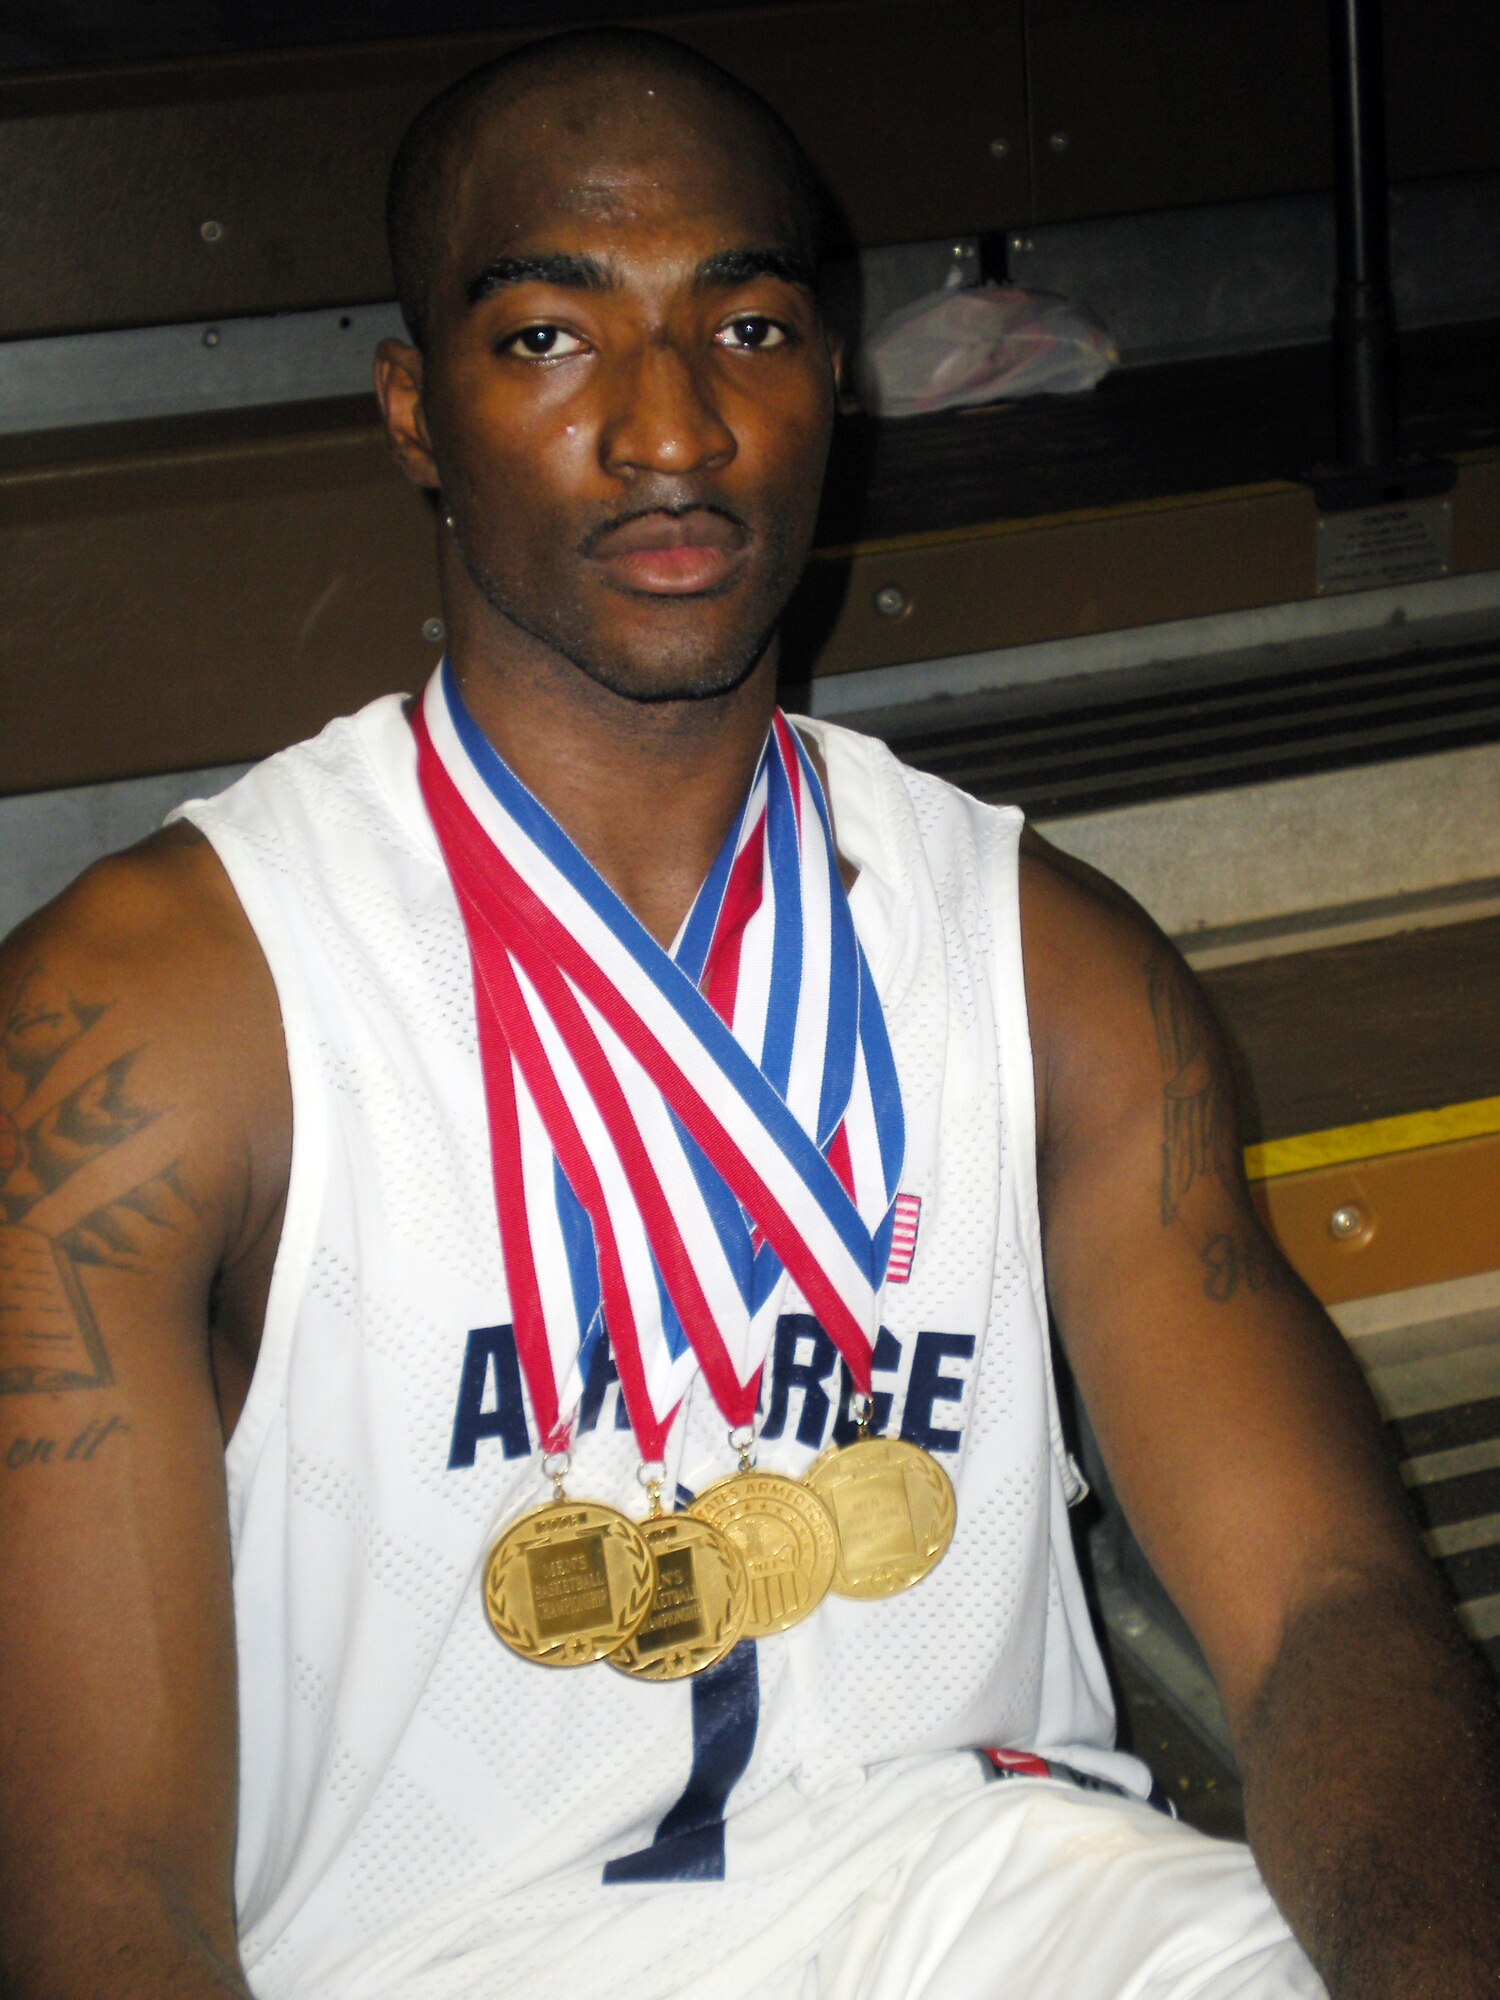 James Lewis, a Senior Airman with the 460th Comptroller Squadron, helped the Air Force team win the Armed Forces Basketball Tournament for the fourth year in a row. This year's team had to scratch out every win as the majority of the team could not return due to deployments and other obligations.